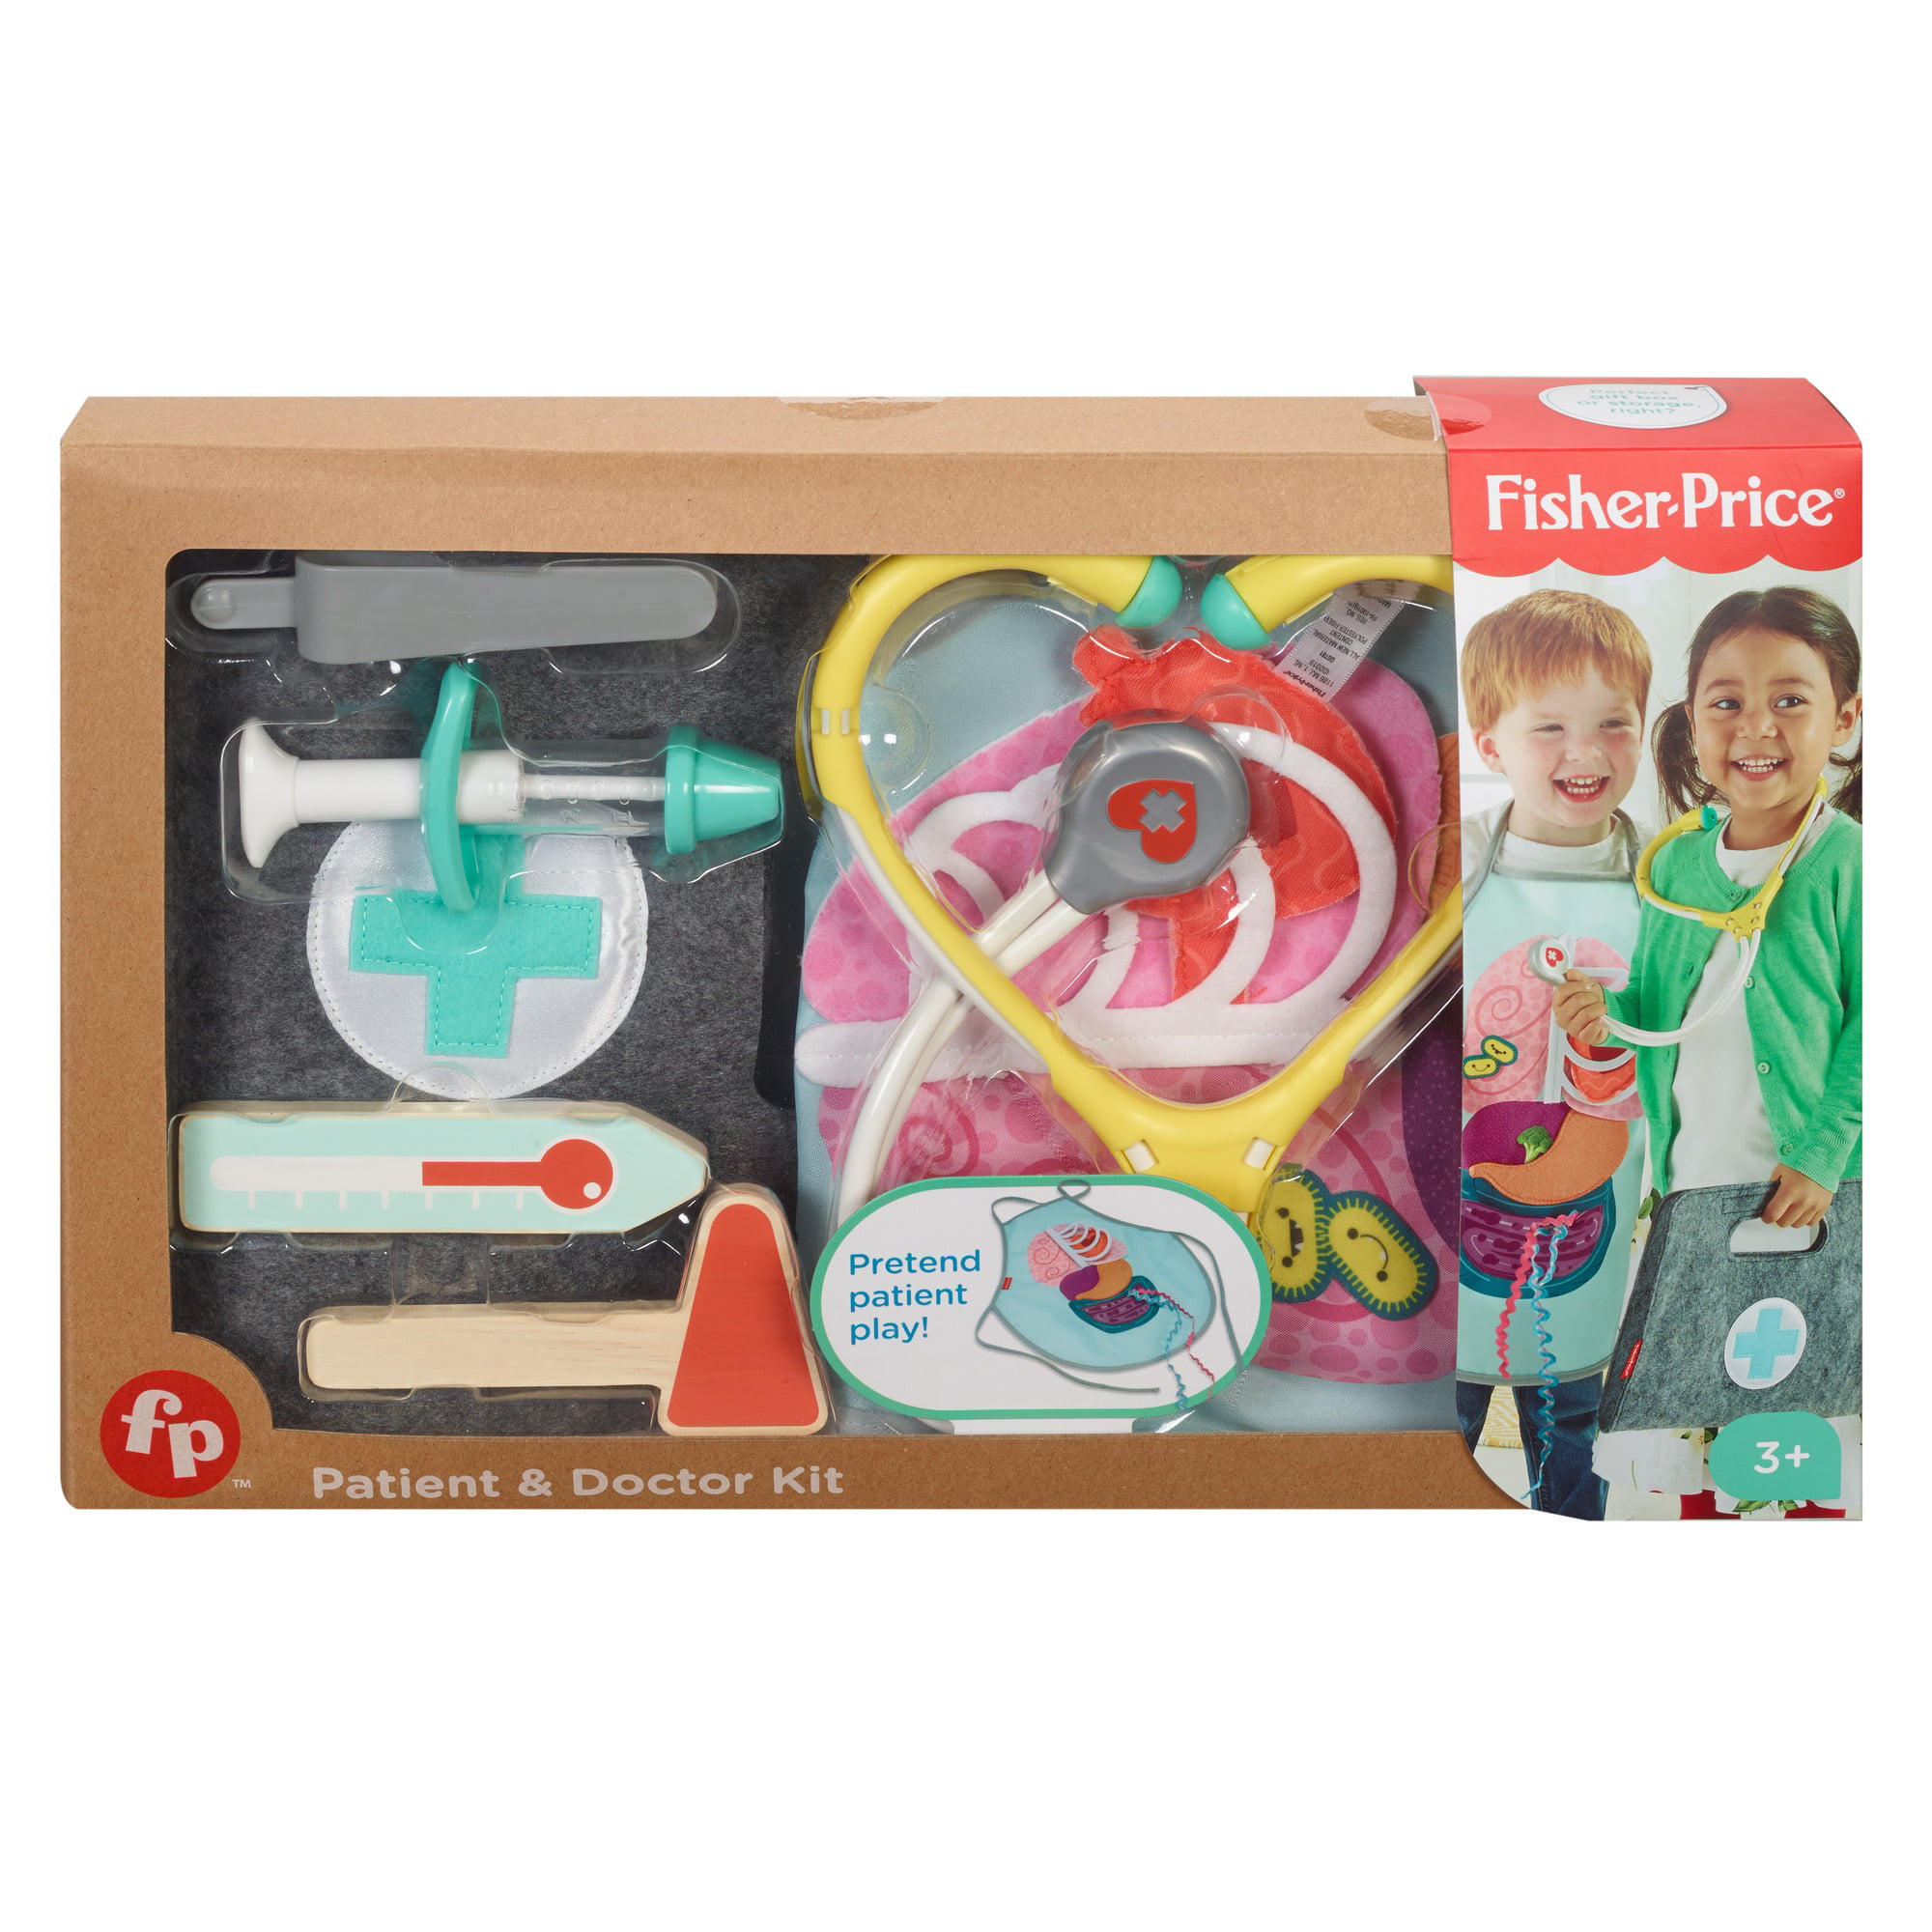 Fisher-Price Patient Doctor Kit Pretend Play Set DAMAGED PACKAGE 